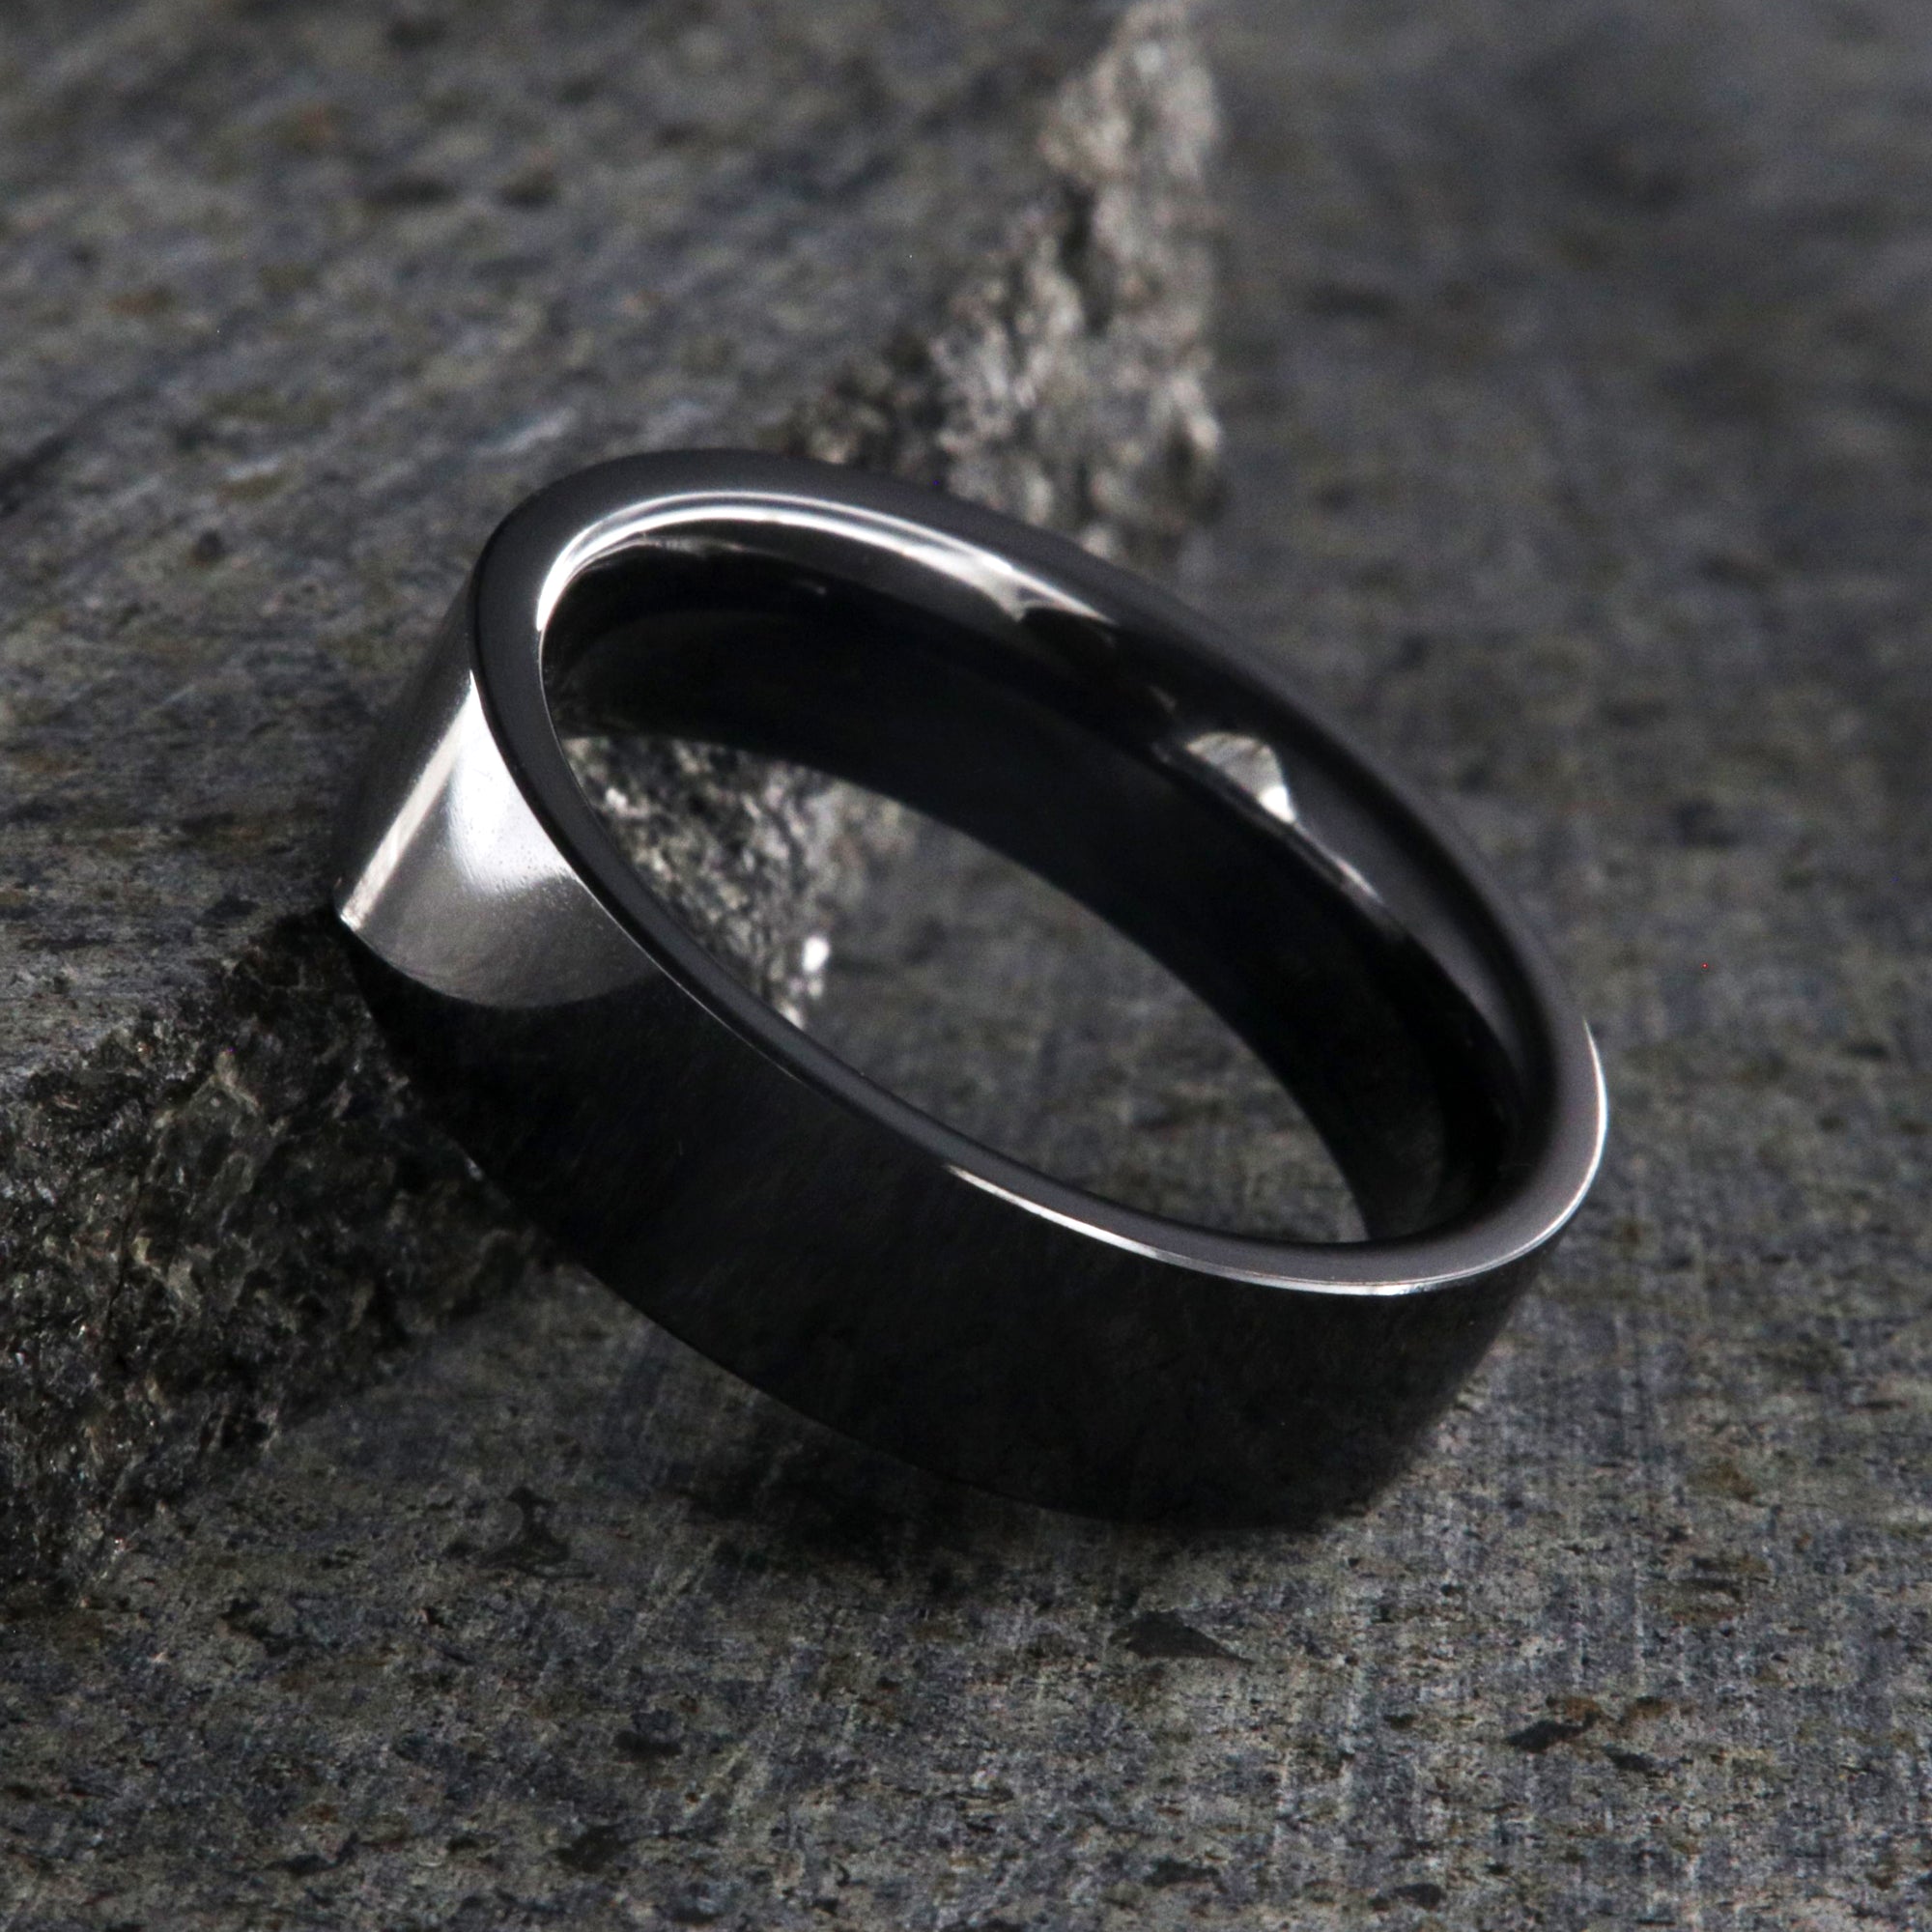 6mm wide black ceramic ring with a flat profile and polish finish